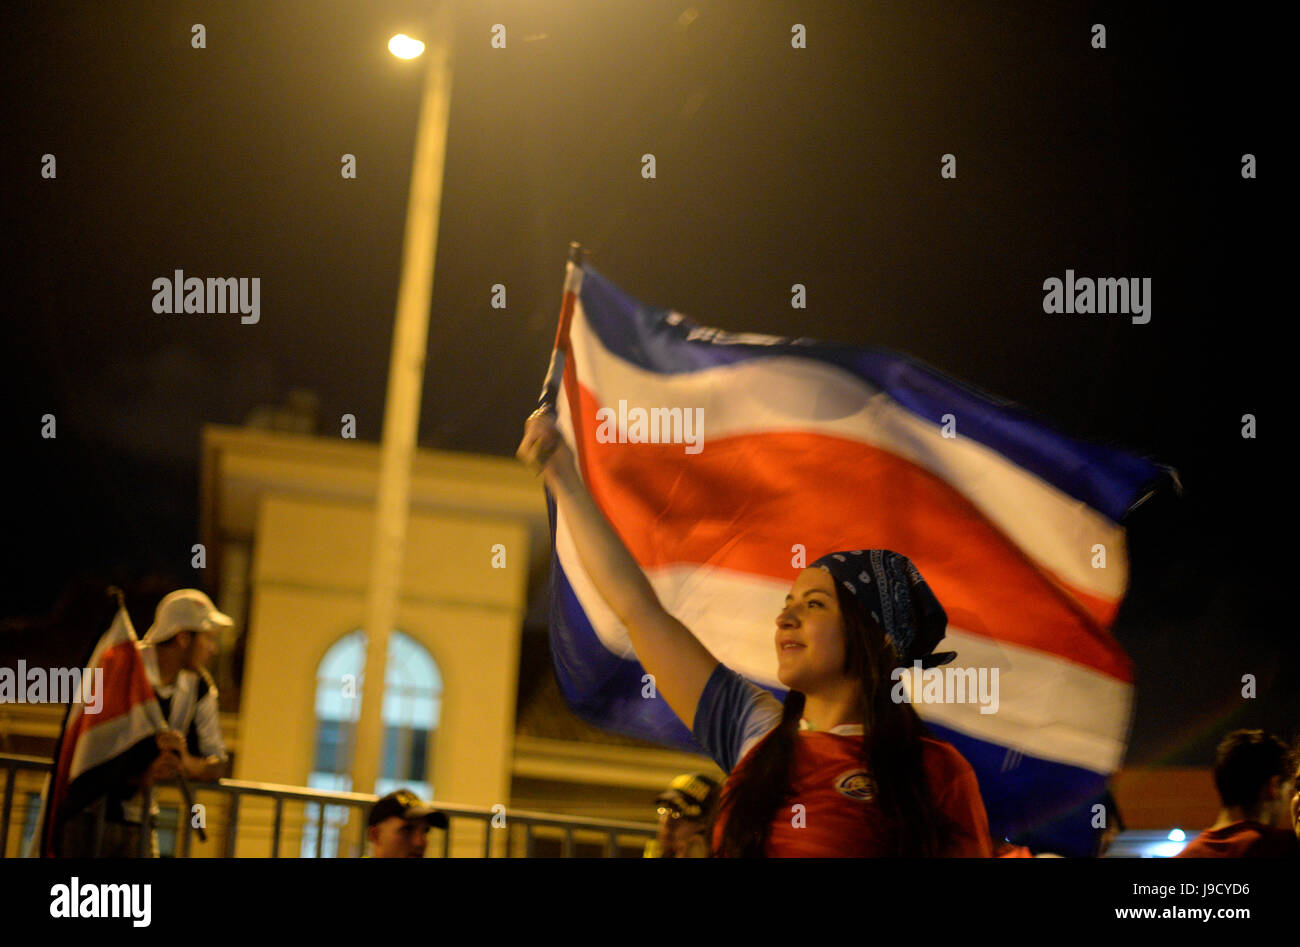 A Costa Rica fan waves a flag in San José after their national team defeated Greece for a spot in the quarterfinals of the World Cup on June 29, 2014. Stock Photo